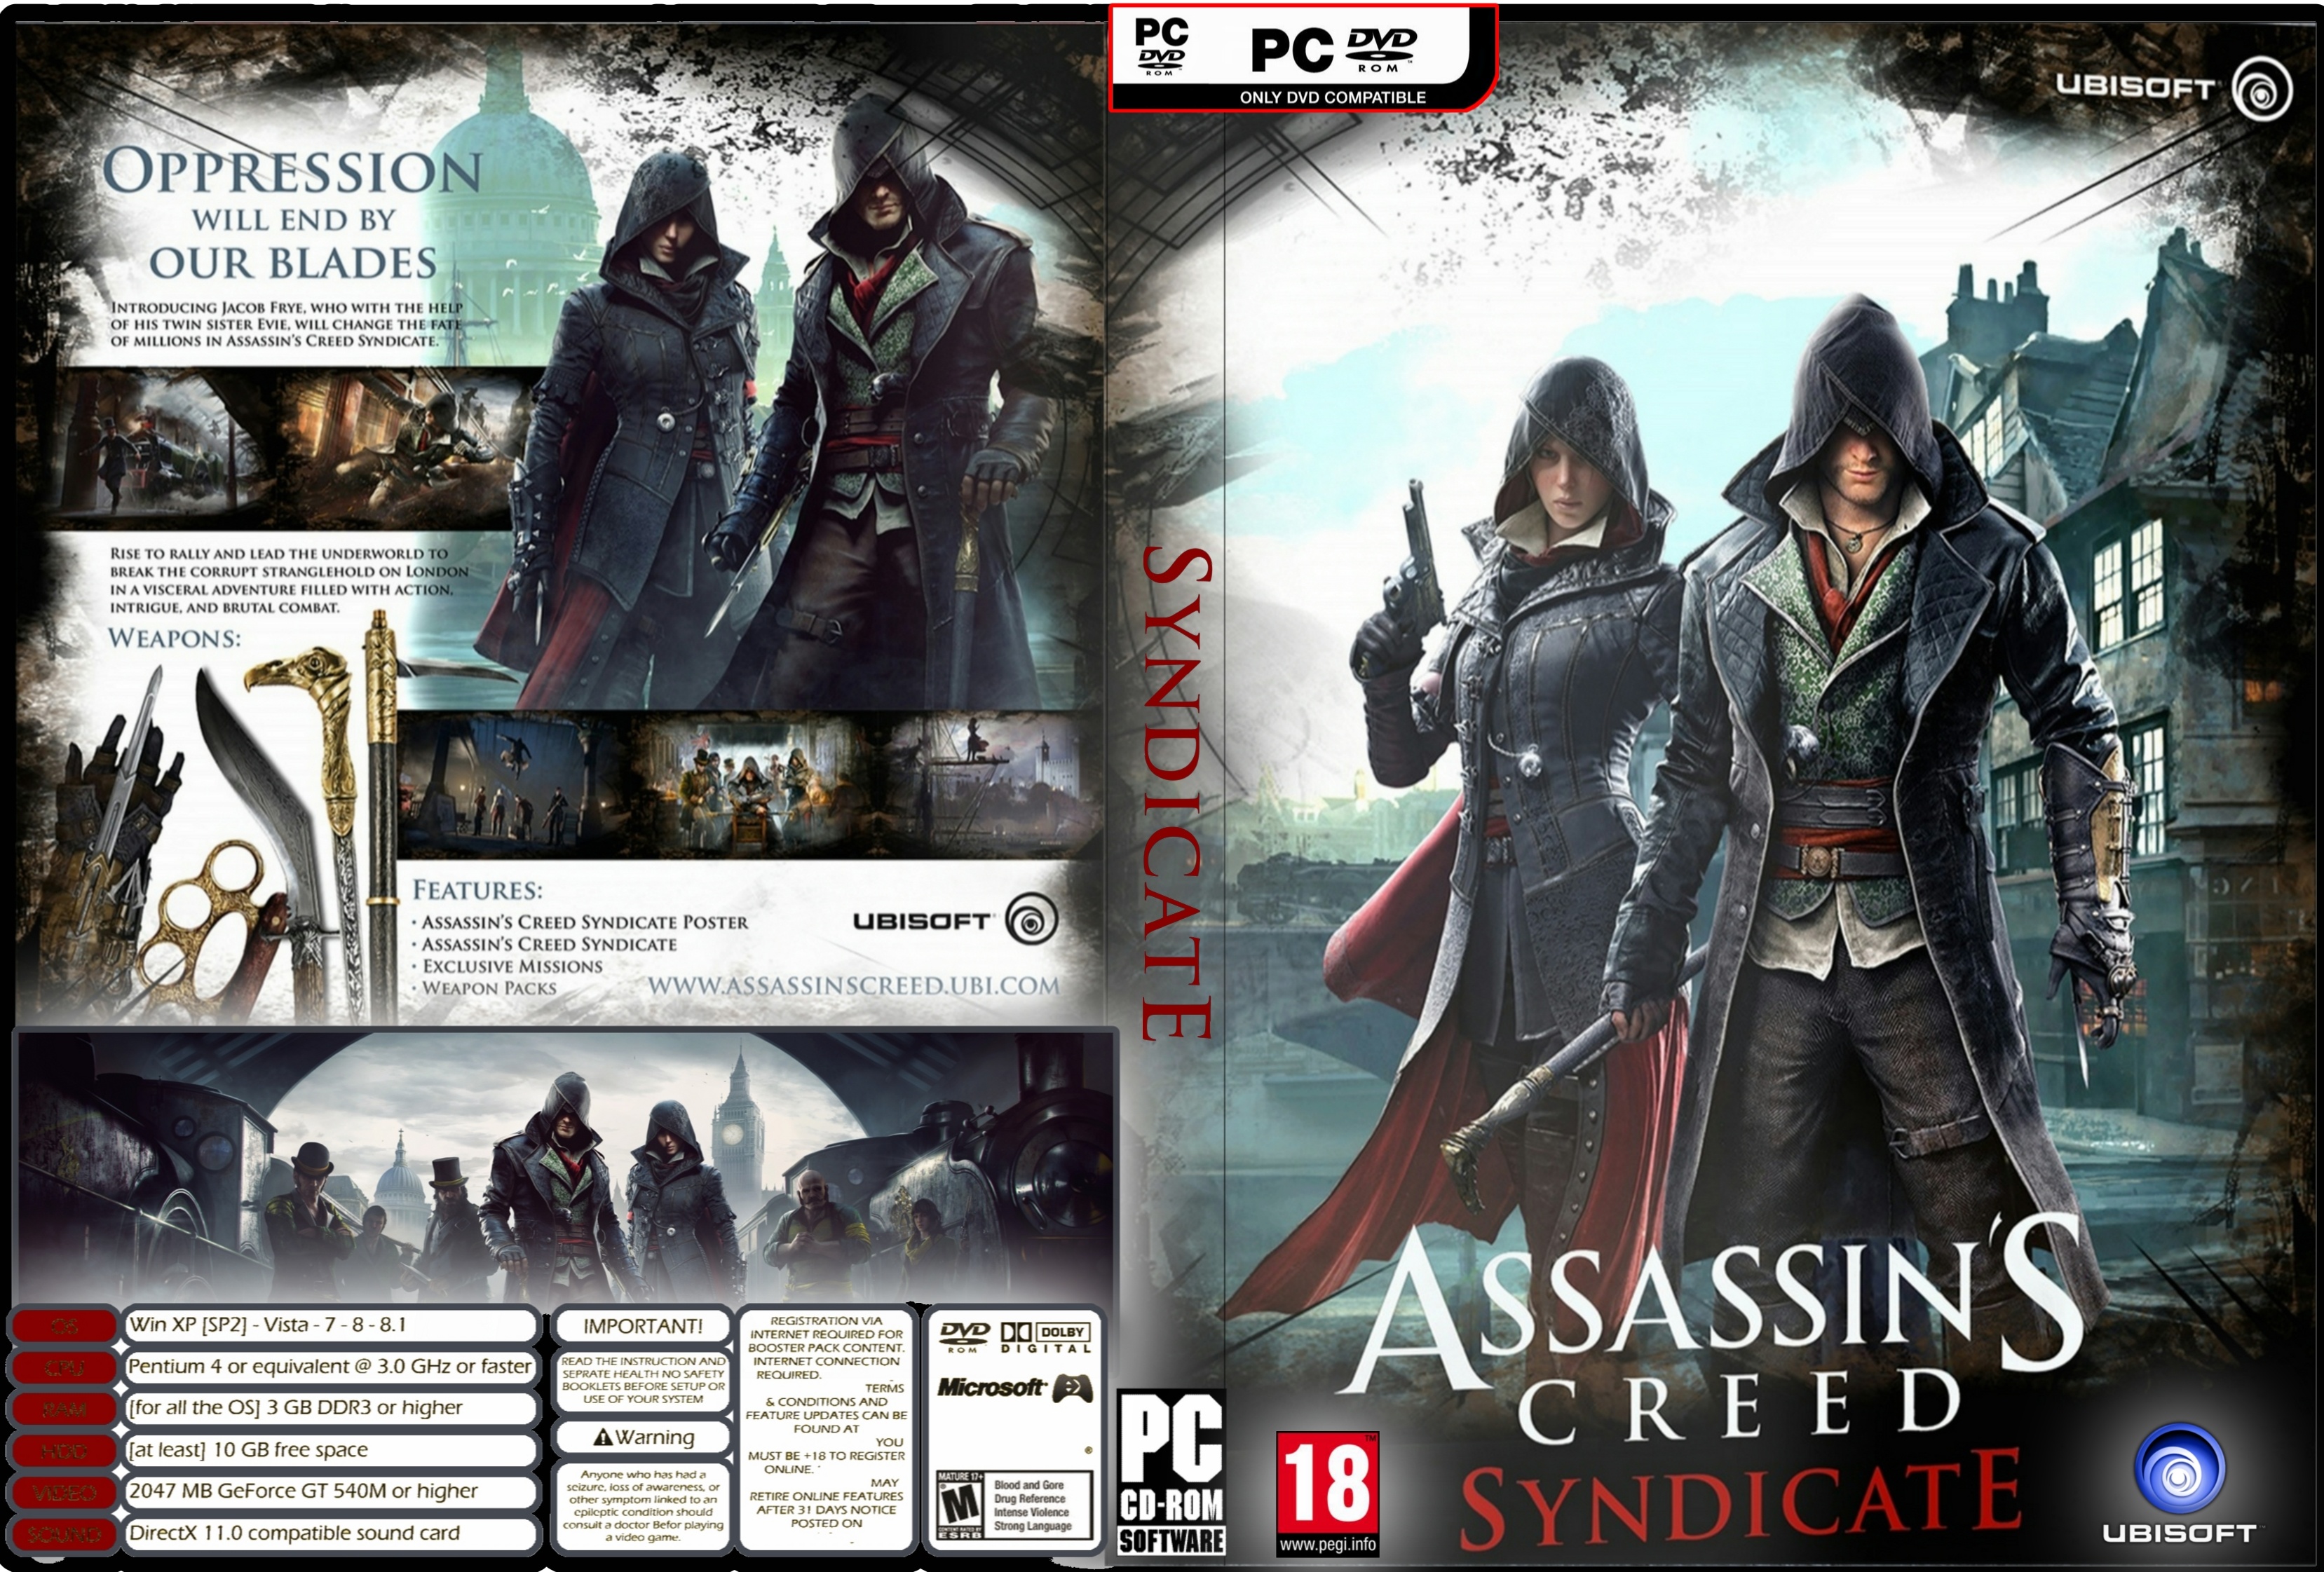 Assassin's Creed Syndicate box cover